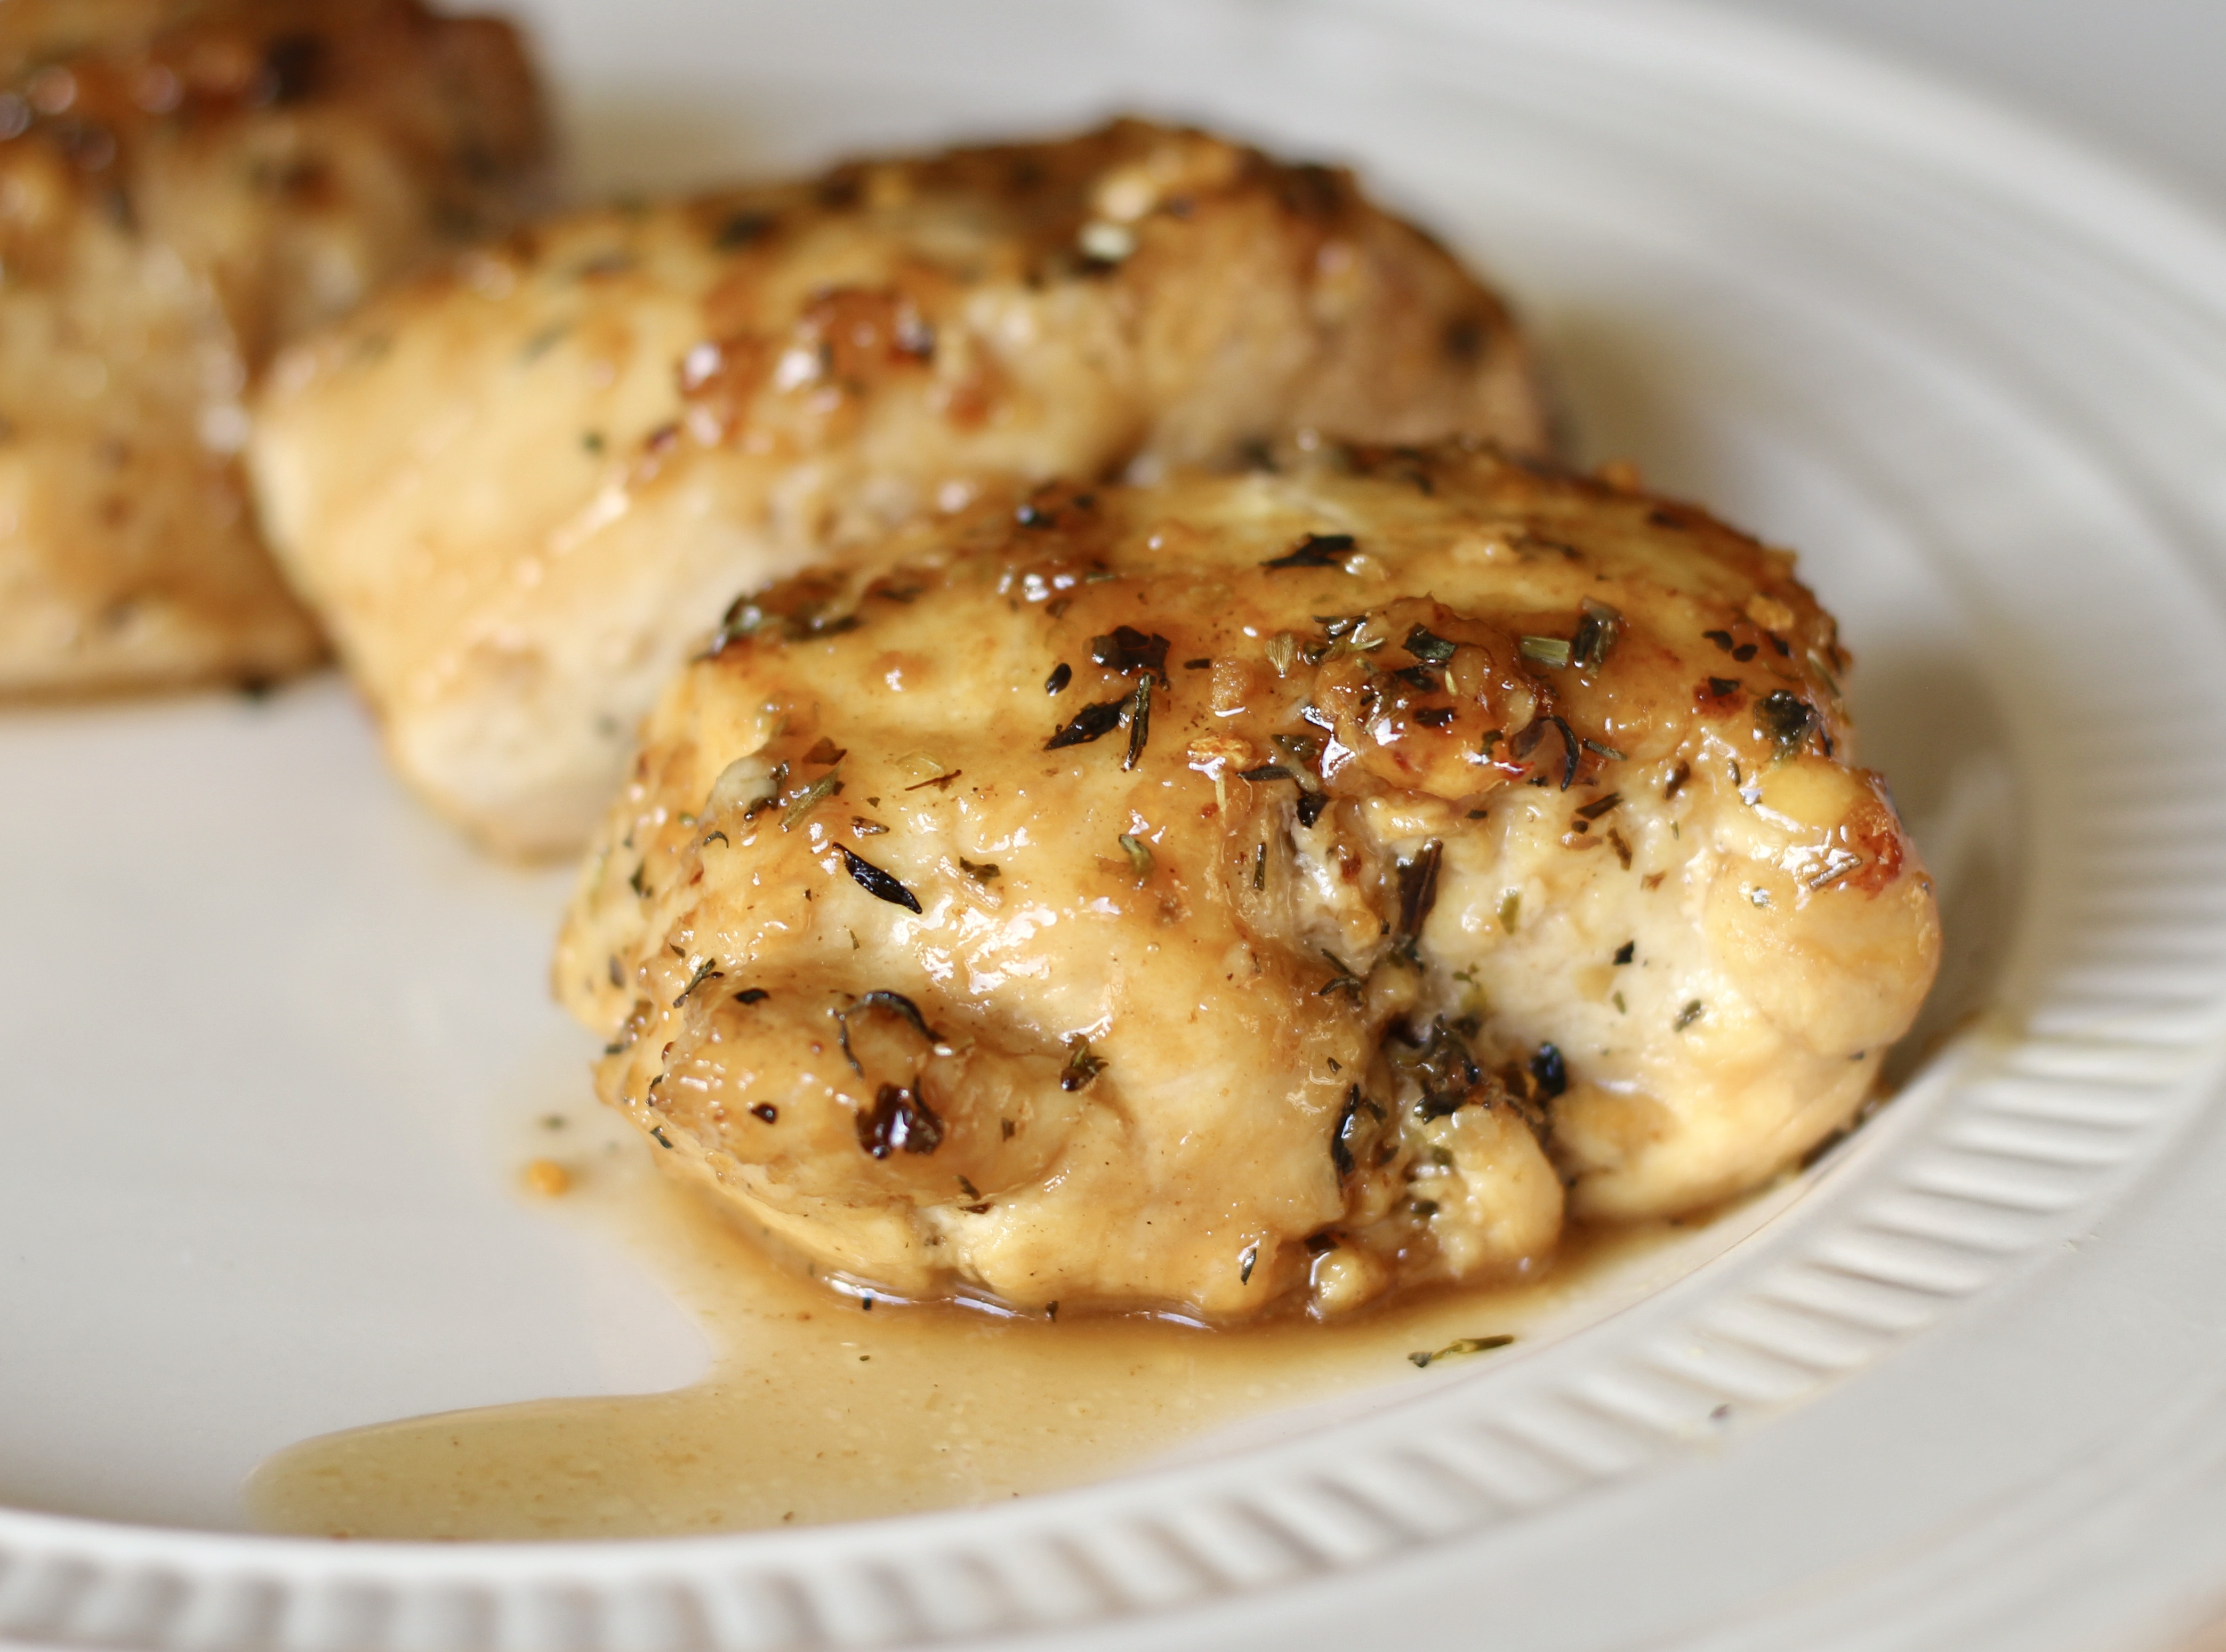 Boneless, skinless chicken breasts may be the weeknight hero, but more home cooks are wising up to the greatness that is chicken thighs. These cuts of meat are often cheaper than breasts (and frequently on sale), and they stay moist and tender even through extra long bouts of cooking (i.e. it's hard to overcook them). This great protein is made even better with the powerfully flavorful combo of garlic and brown sugar, which creates crispy, crunchy bits on the chicken as it cooks.
                          